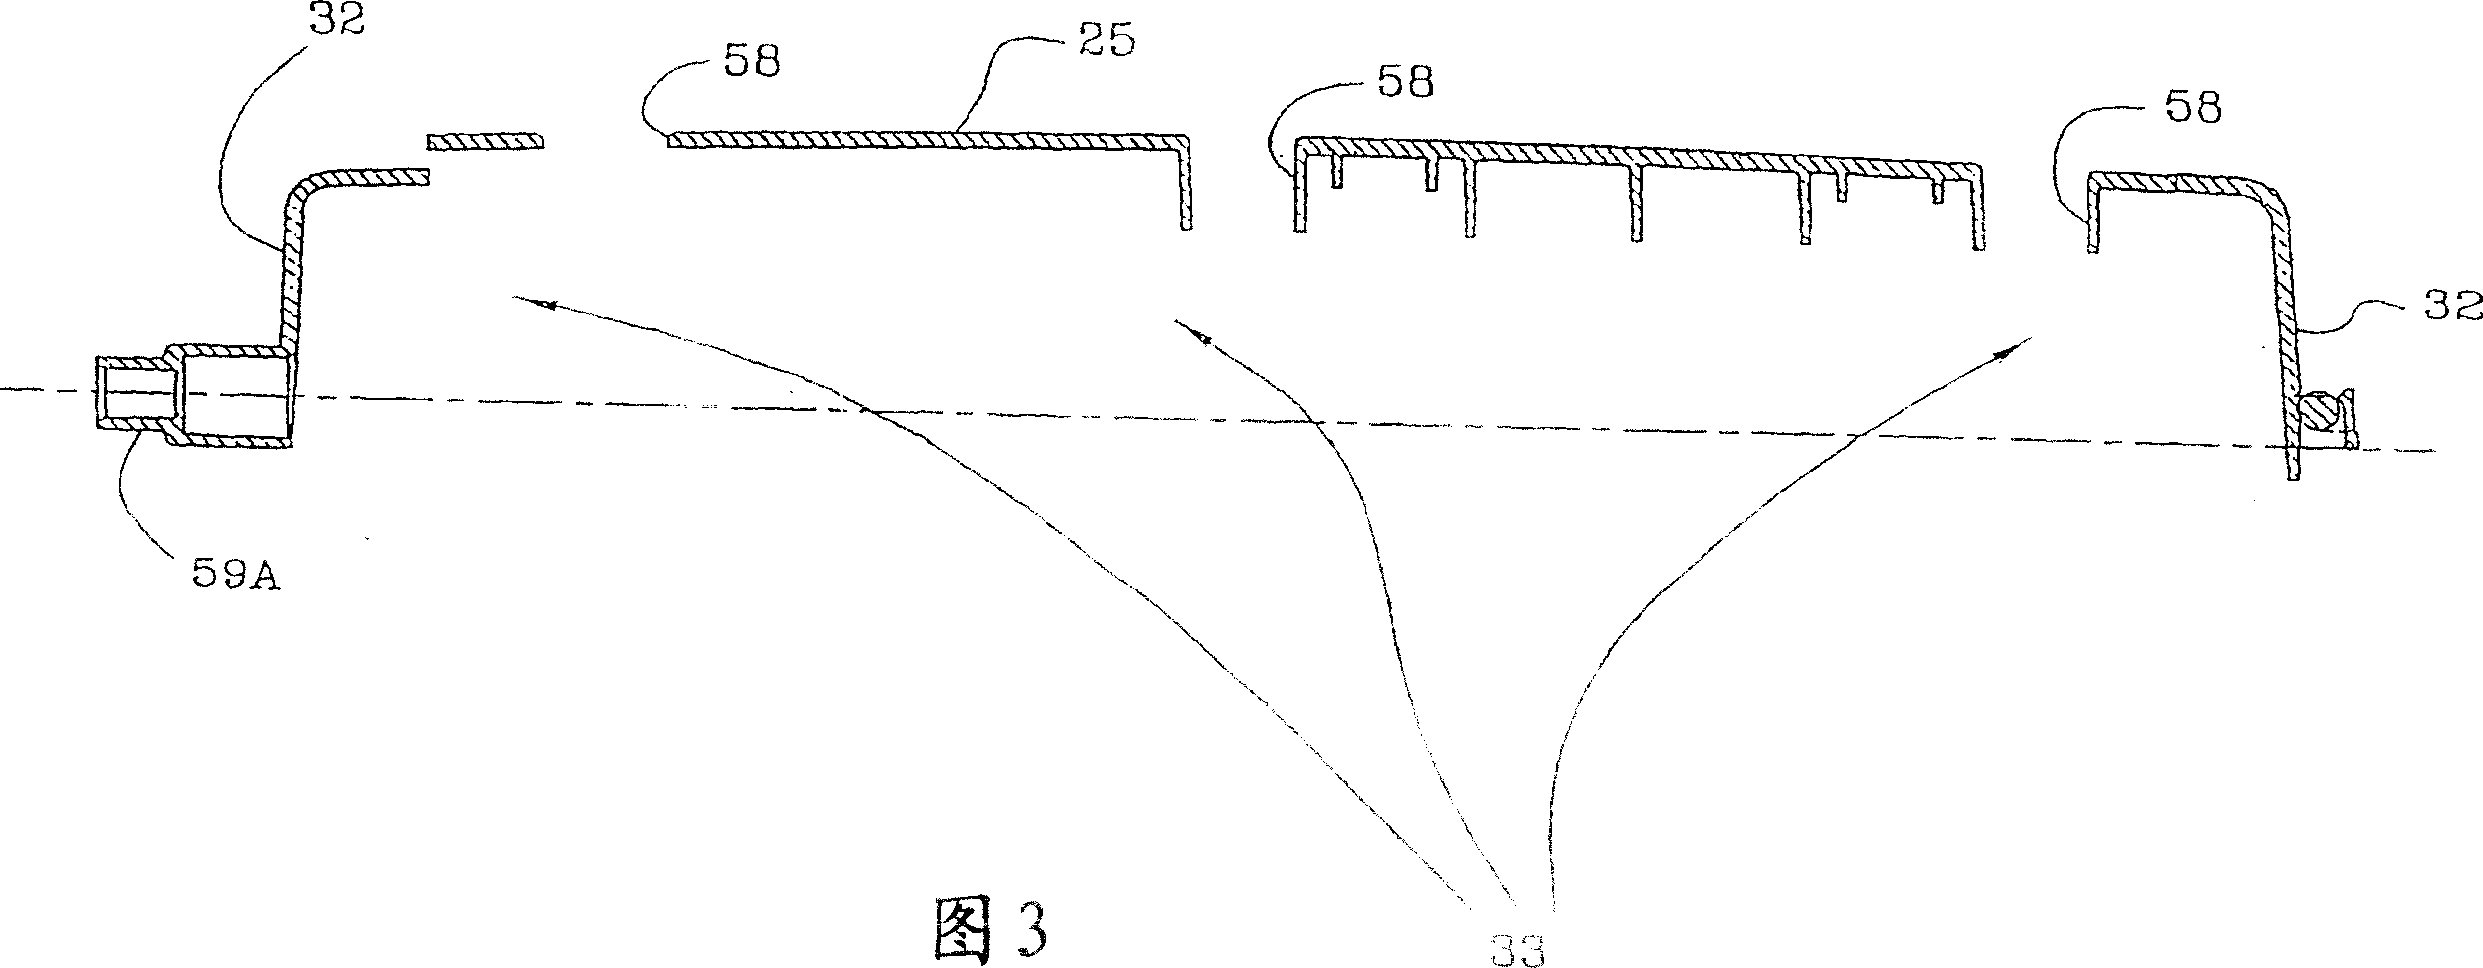 Integrated blood treatment module and extracorporeal blood treatment apparatus